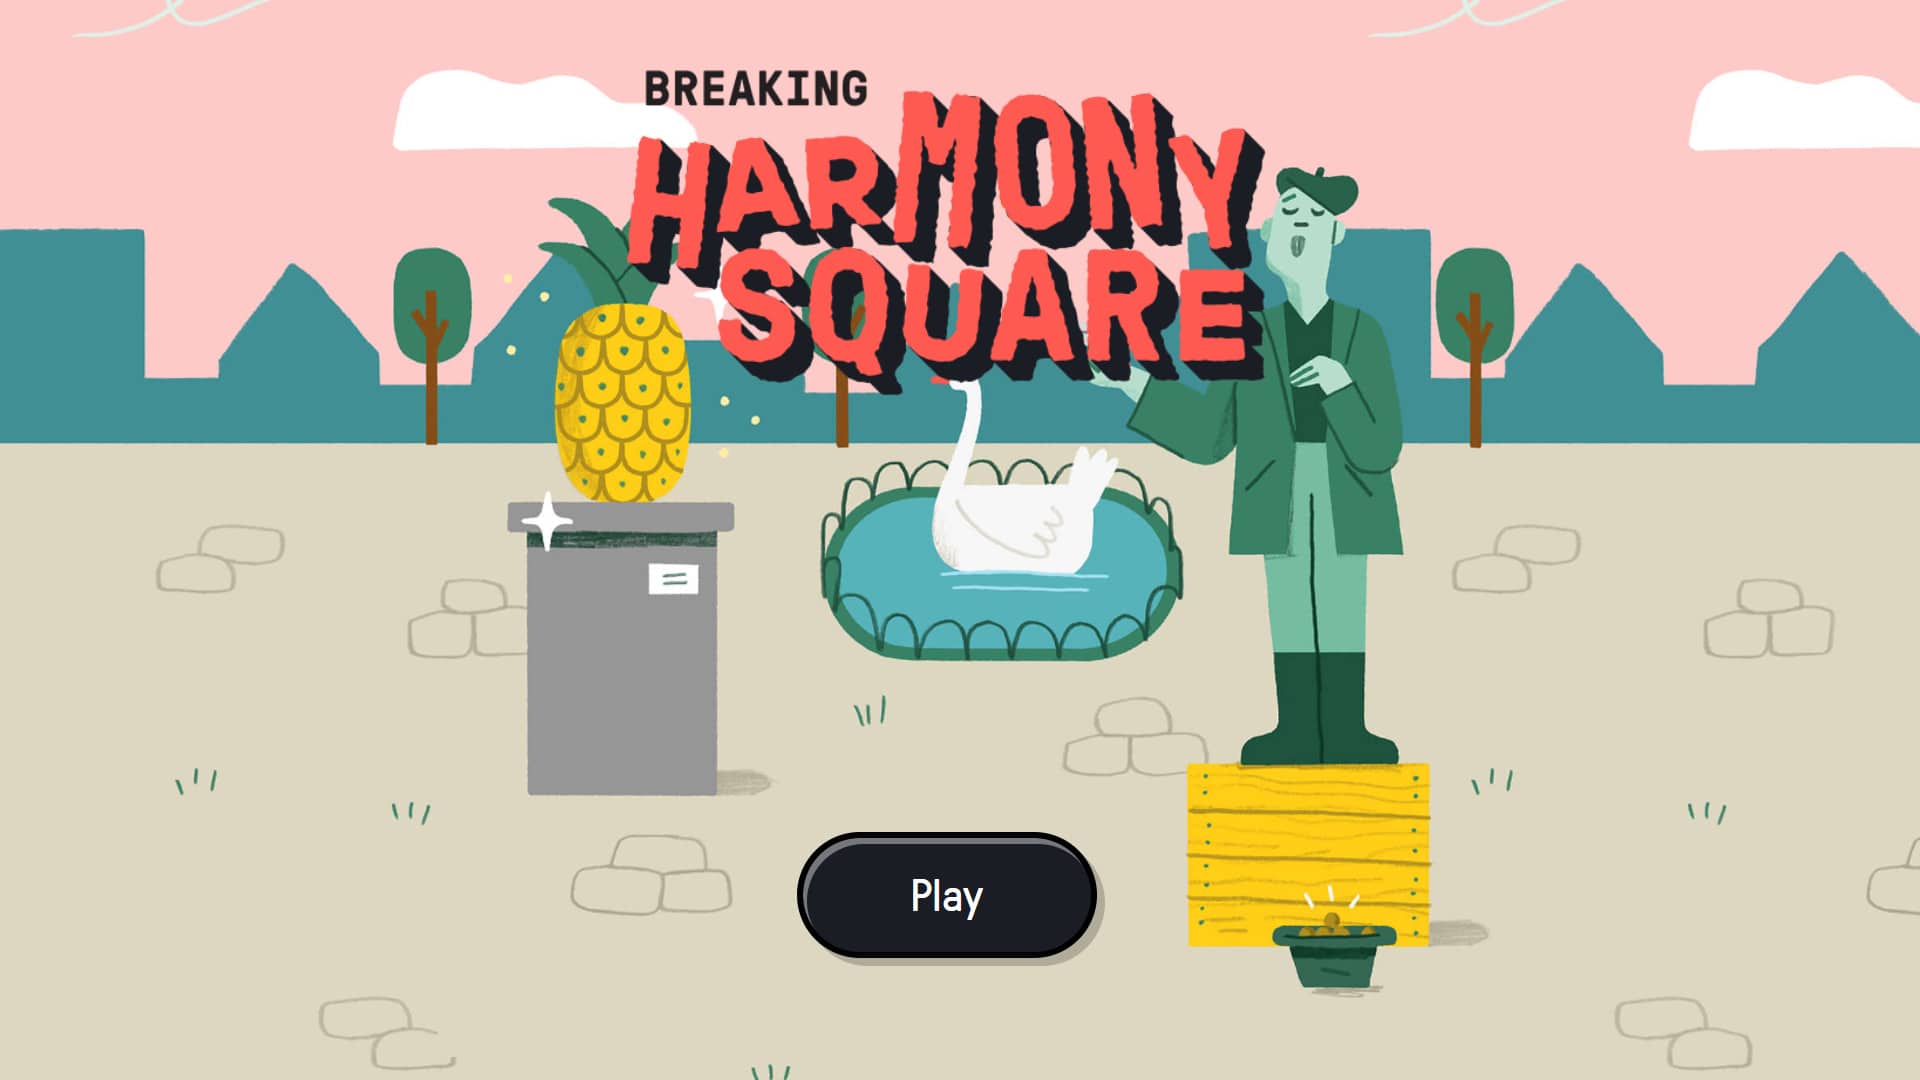 The homepage of Breaking Harmony Square, a disinformation game.